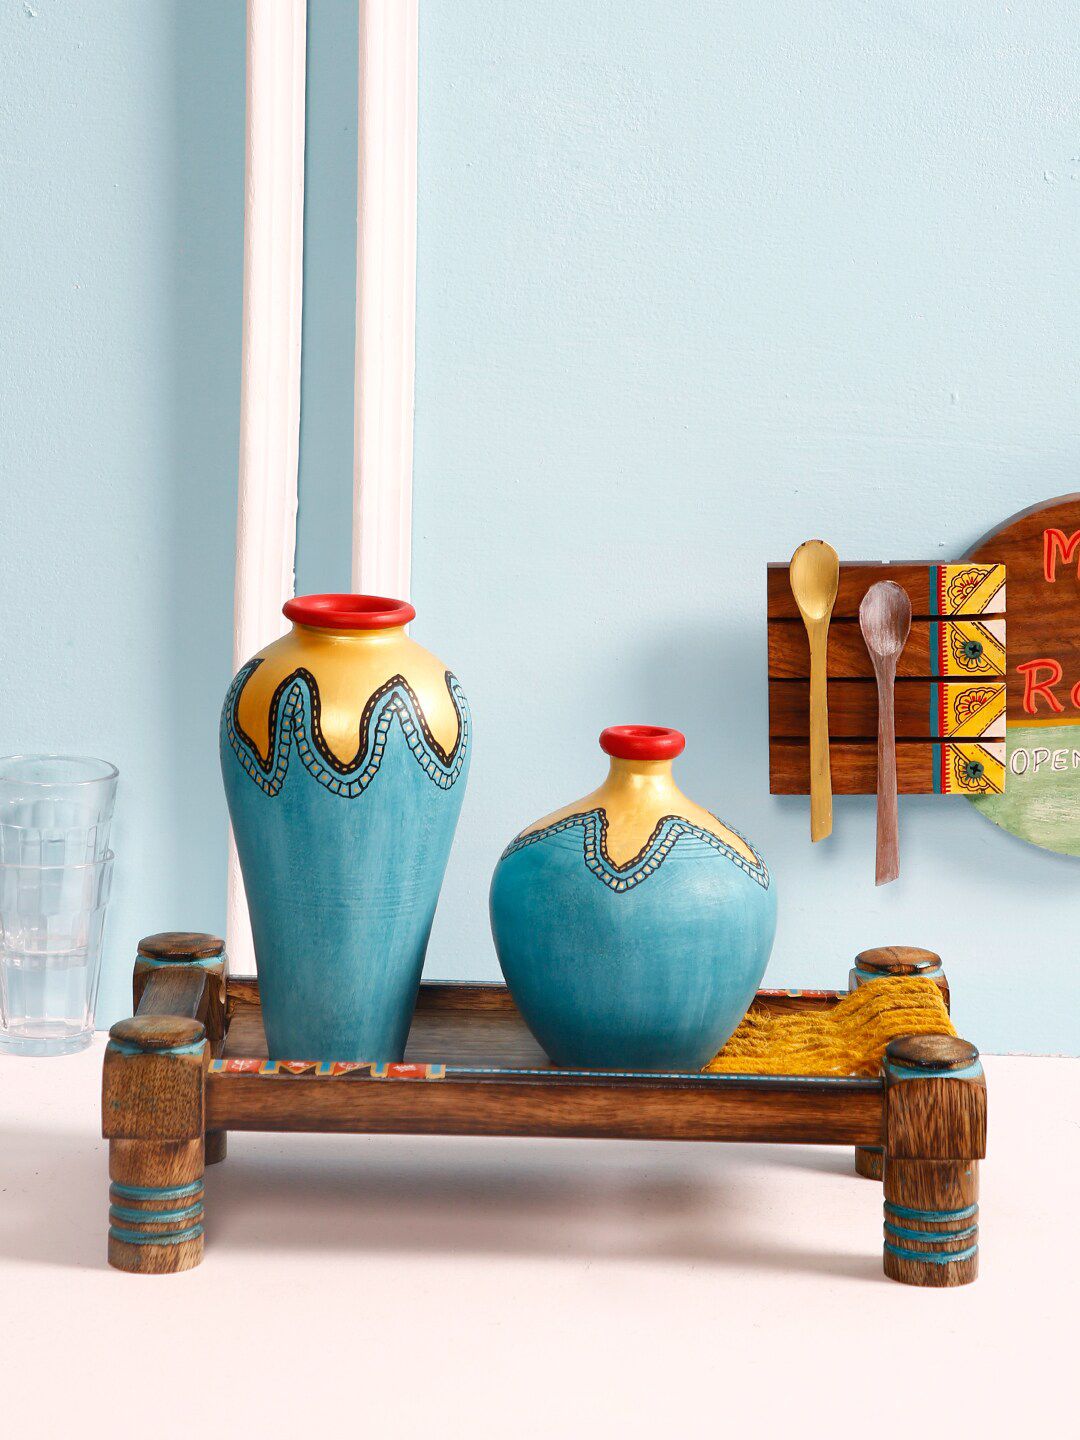 Aapno Rajasthan Set Of 2 Gold-Toned & Blue Hand-Painted Terracotta Vases With Wooden Charpai Price in India